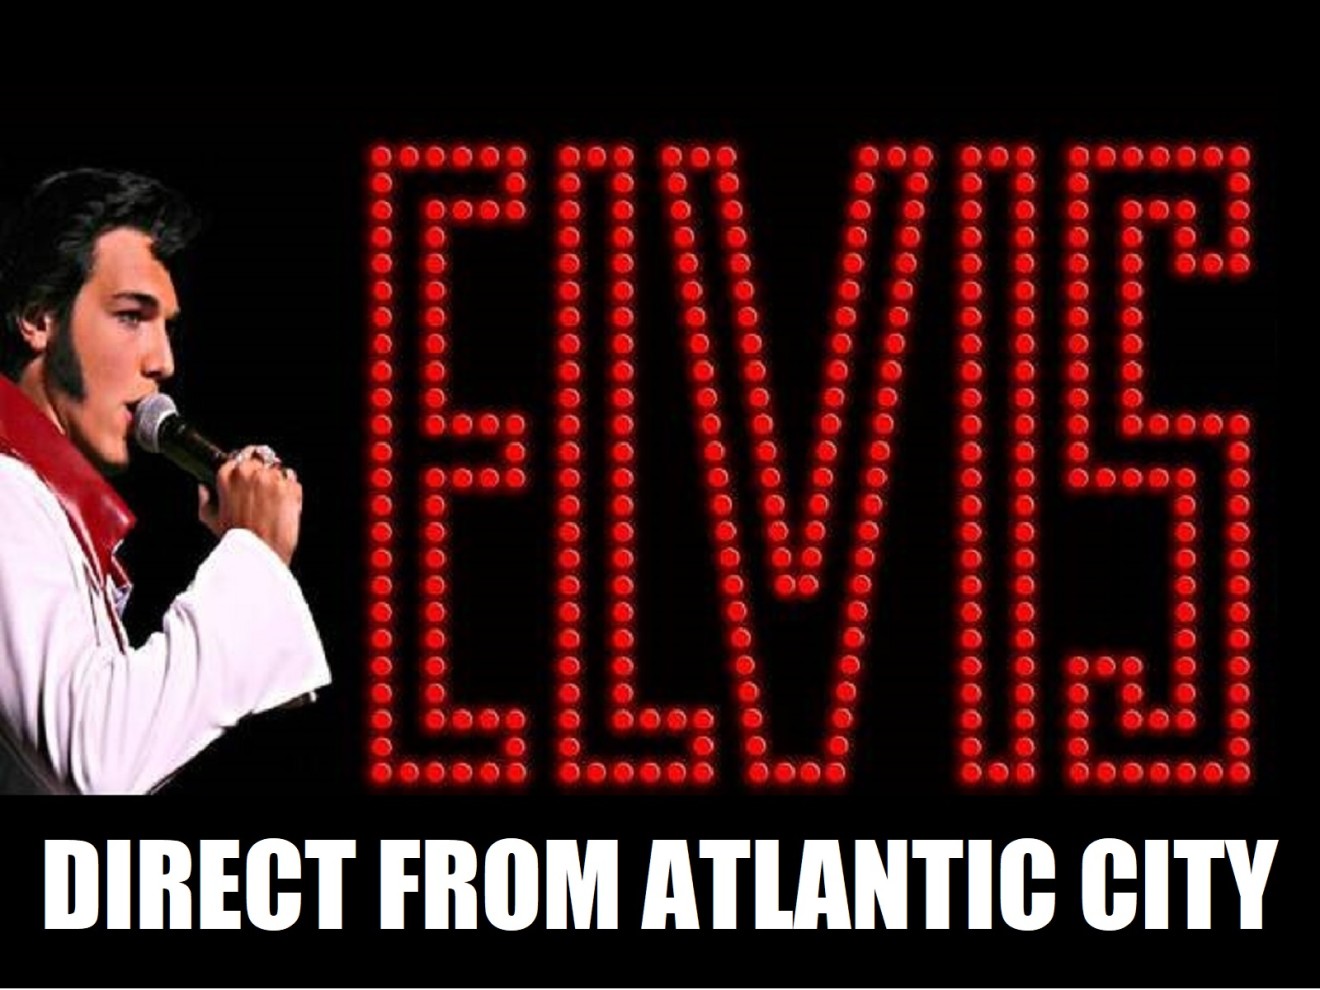 ELVIS LIVES! - Tribute Direct from Atlantic City